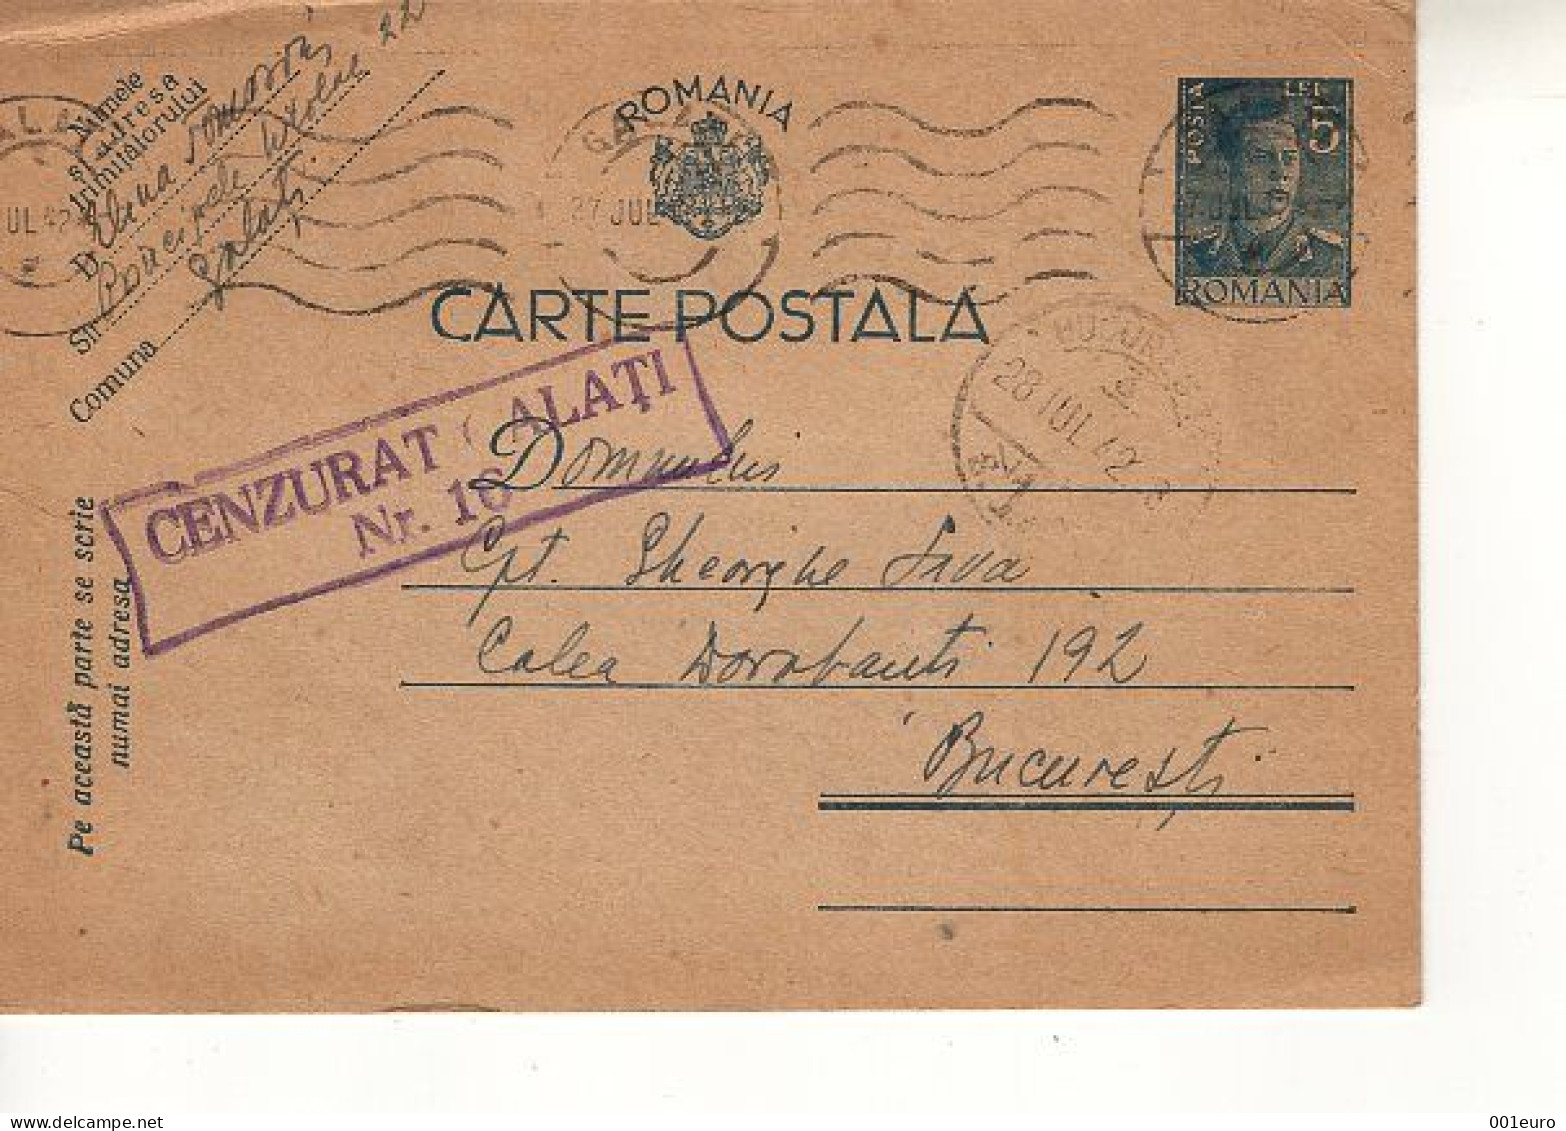 ROMANIA 1942: CENSORED MAIL, Used Prepaid Postal Stationery Card - Registered Shipping! - Entiers Postaux